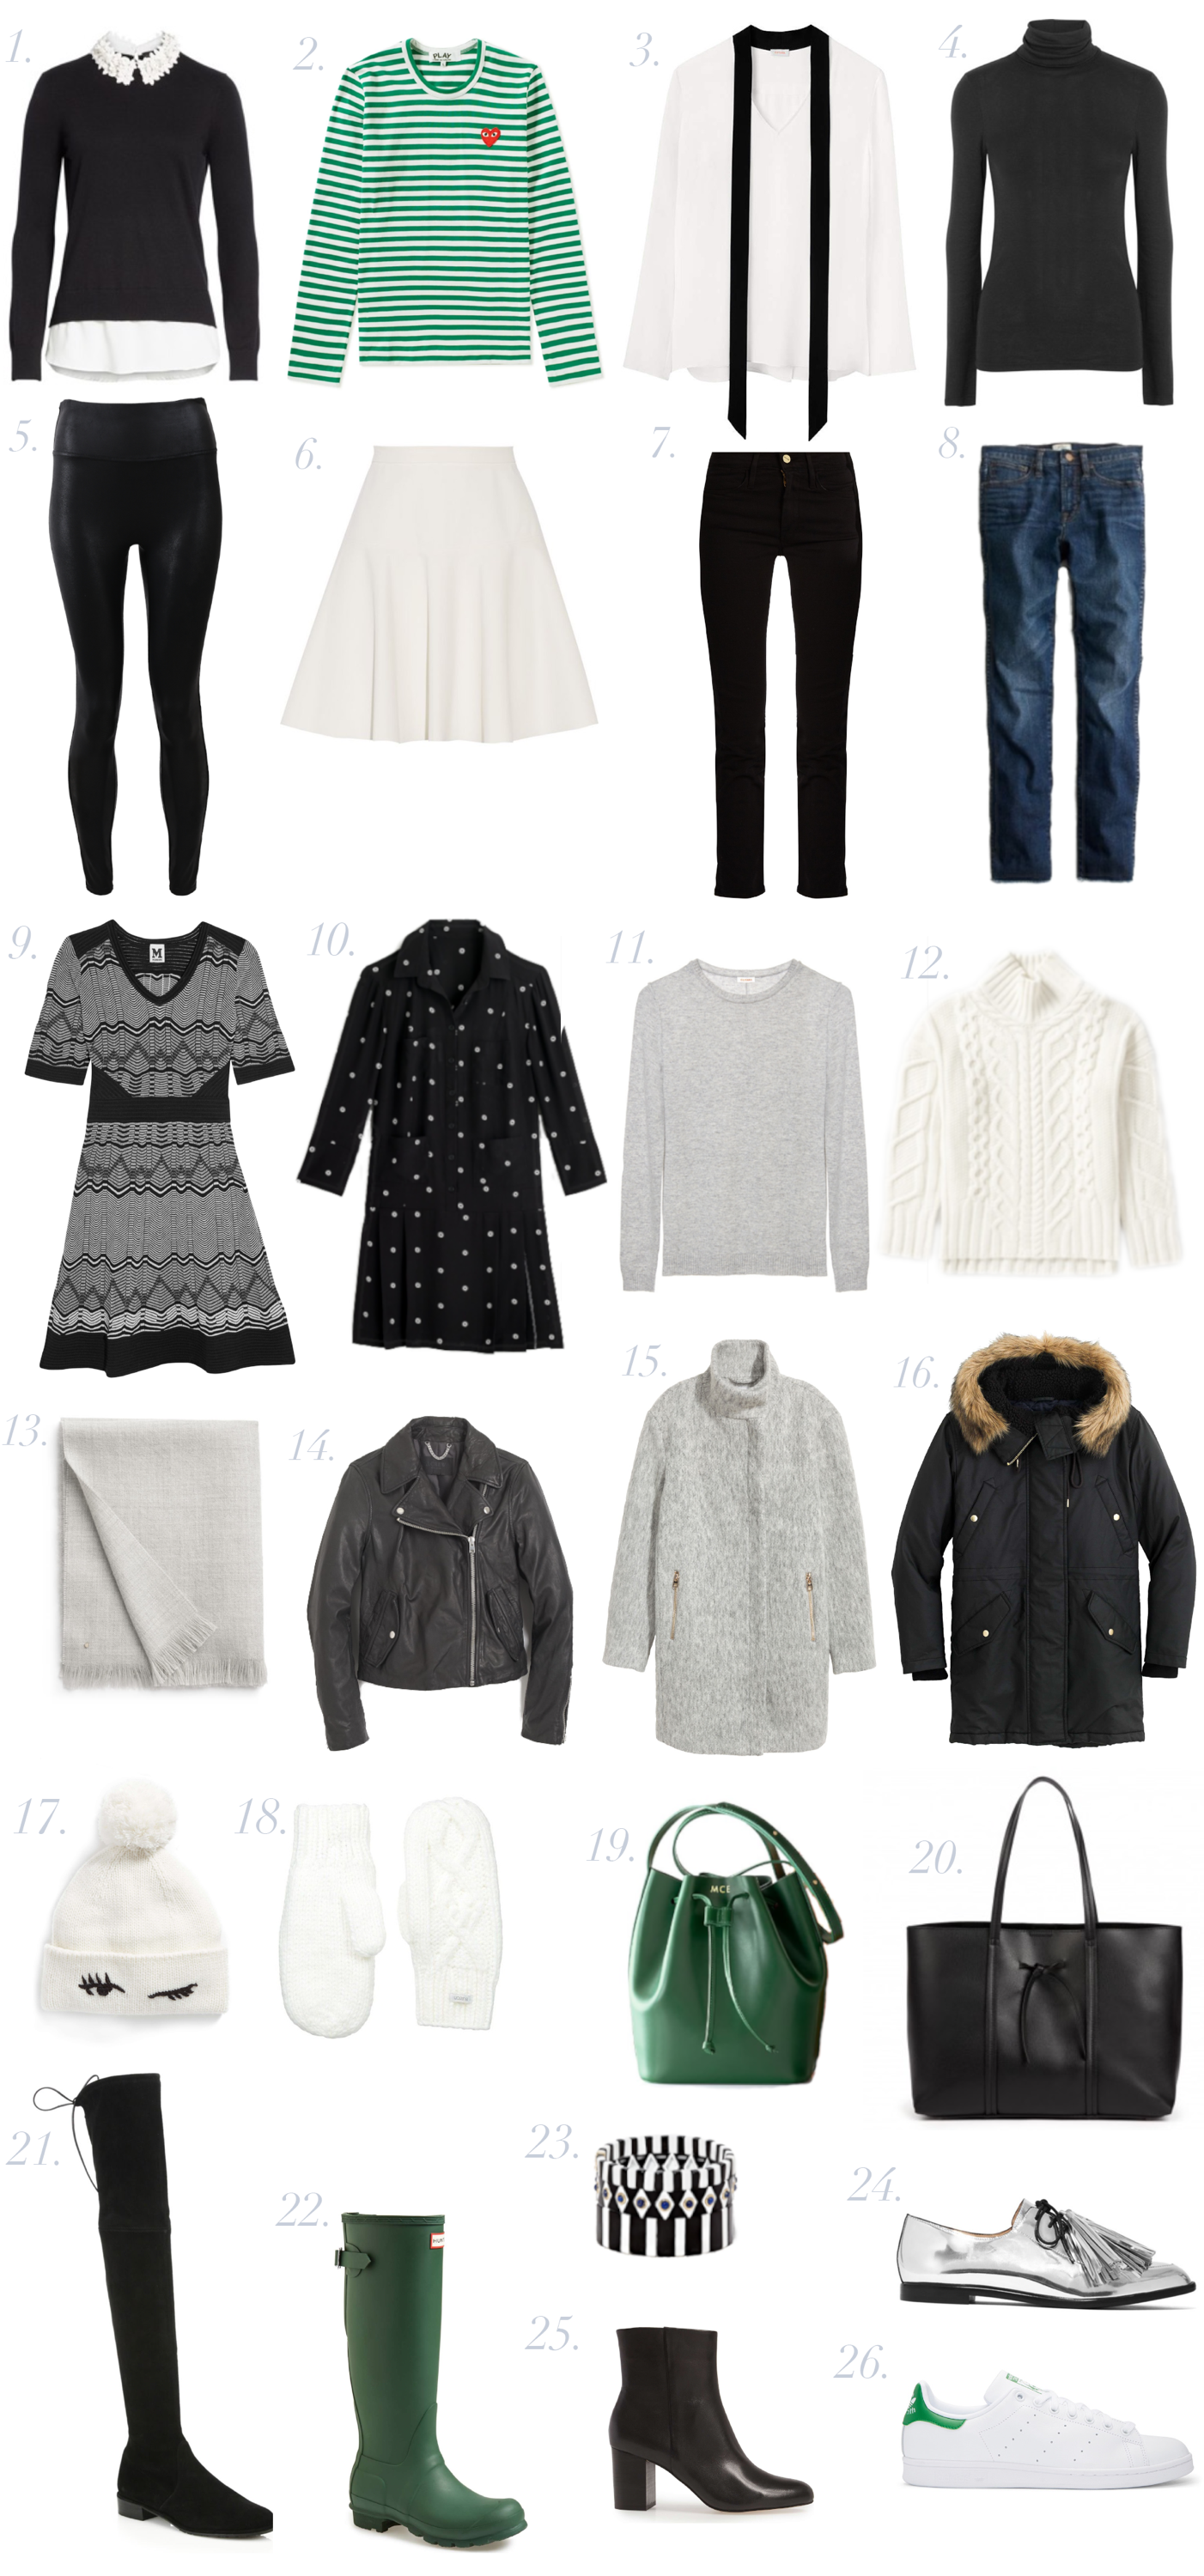 Packing-for-Europe-Winter-MonicaFrancis